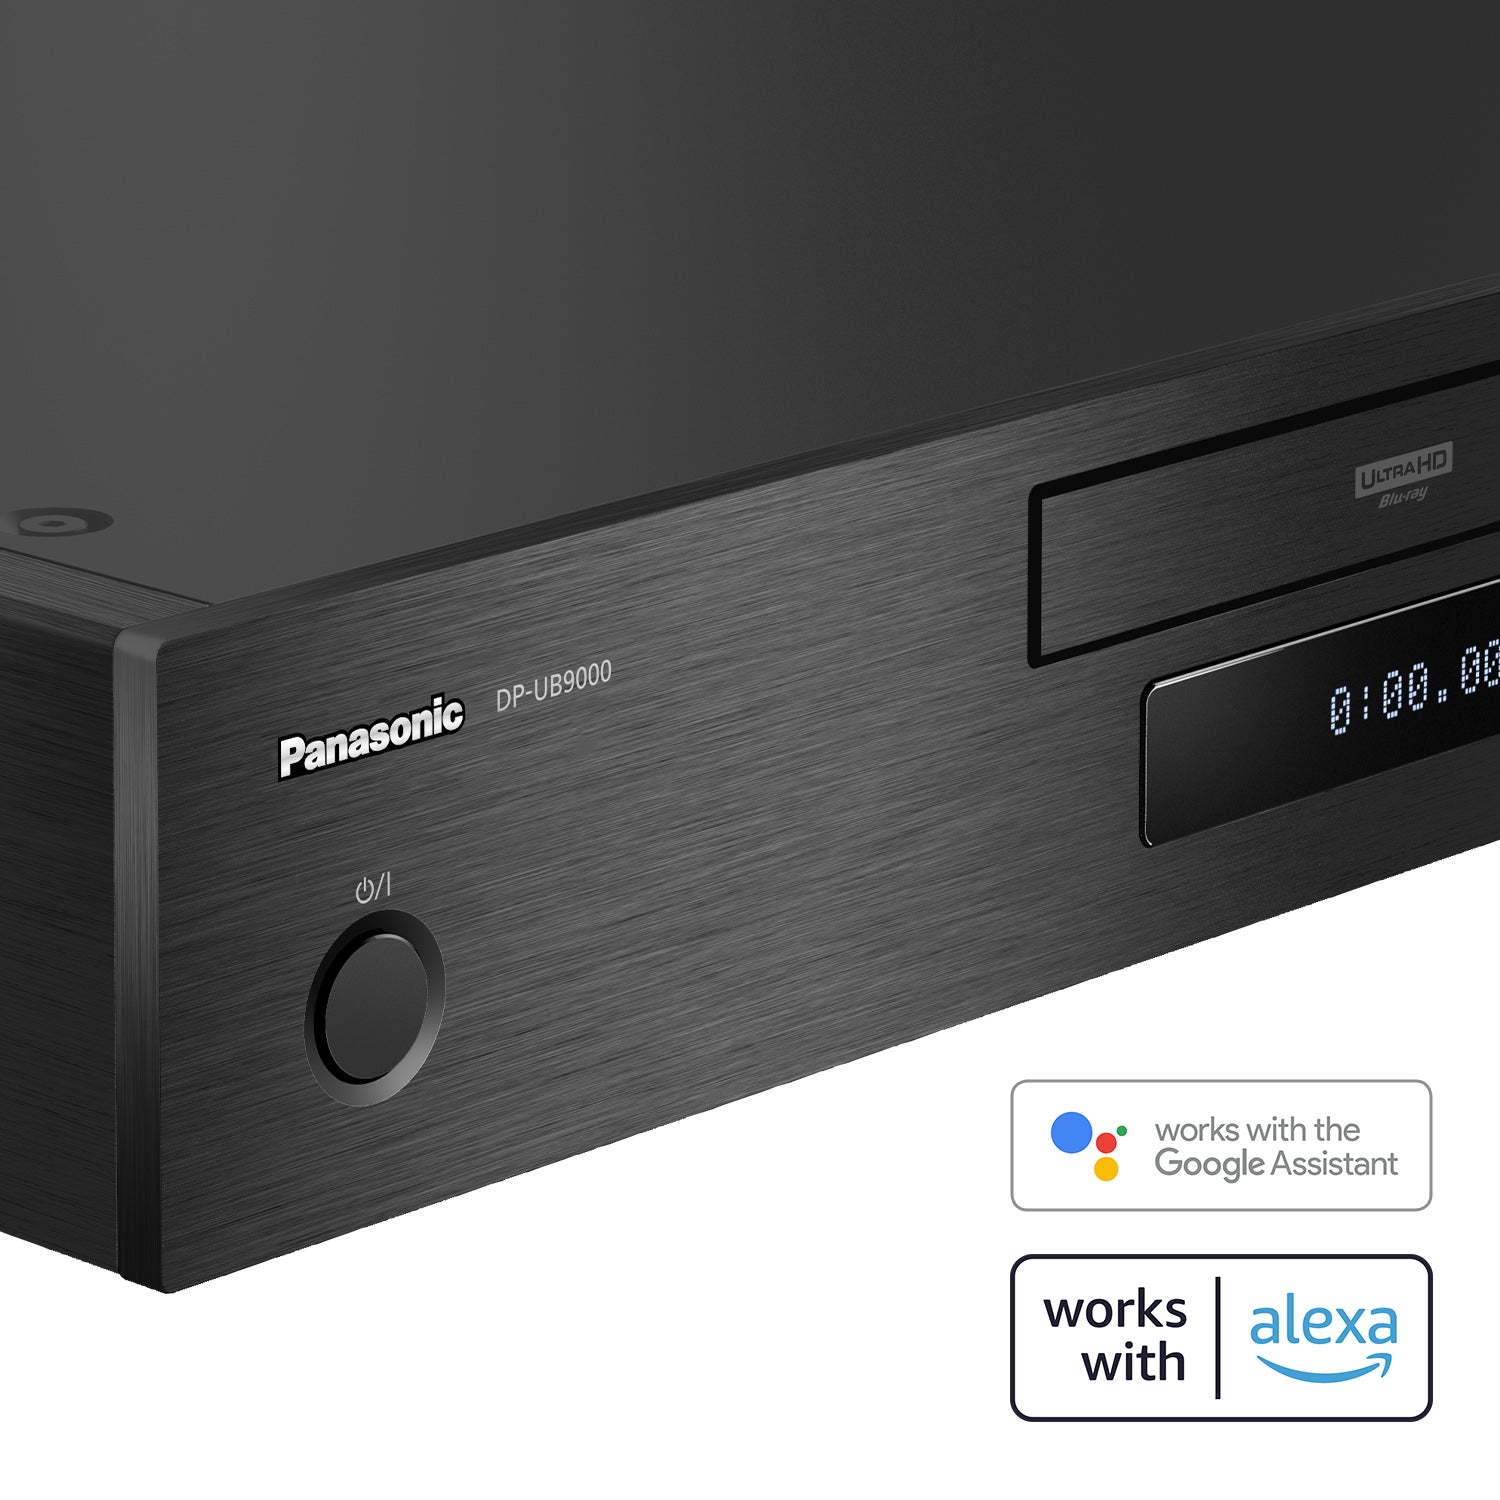 Get the best picture and price with $50 off a Panasonic 4K Blu-ray